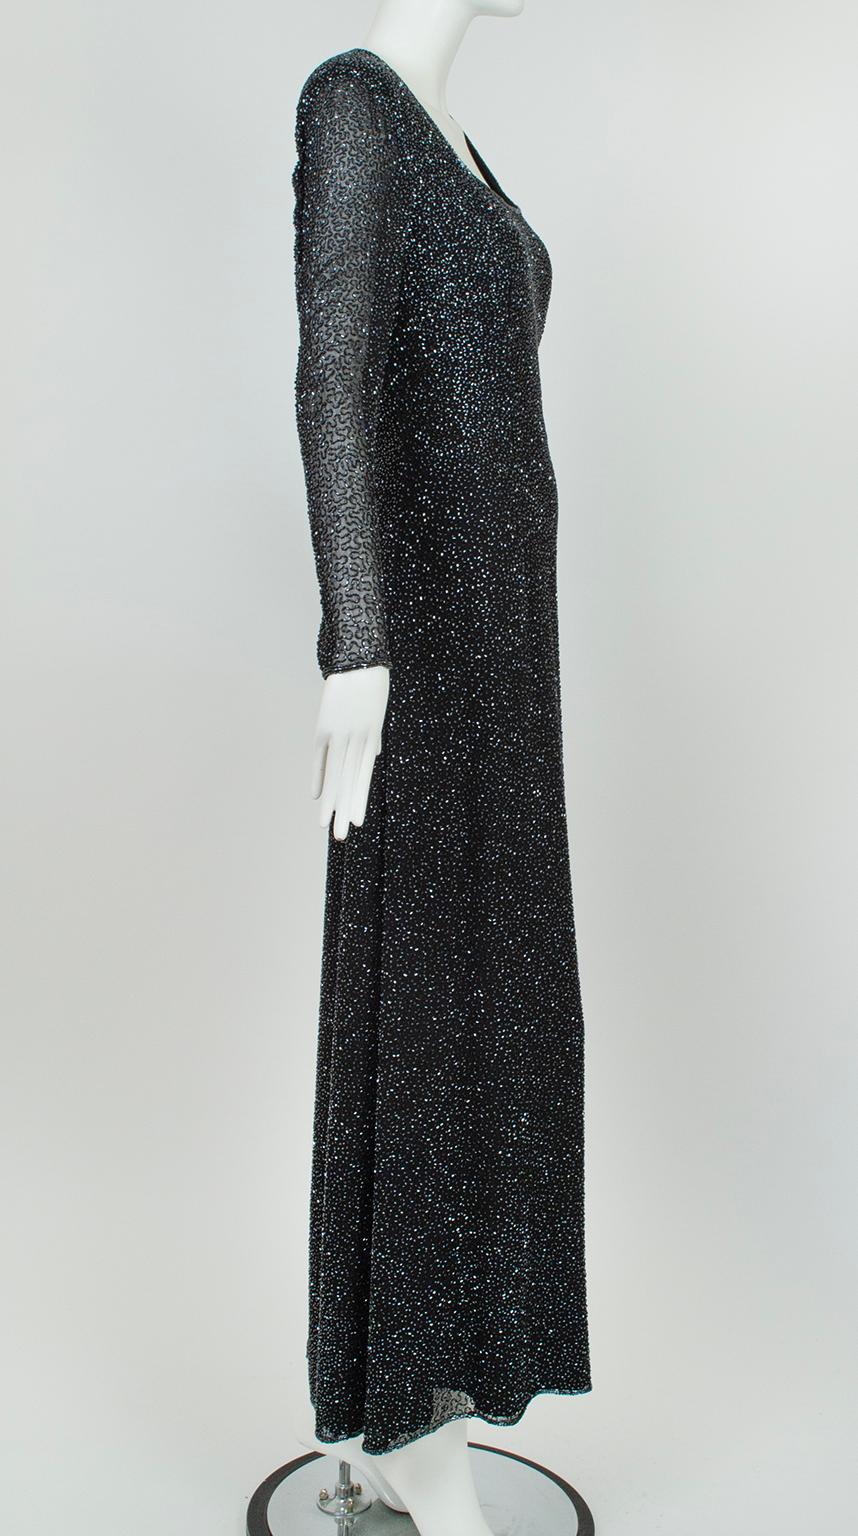 Exquisitely simple, this statuesque floor length gown pairs a minimalistic column silhouette with dazzling black aurora borealis bugle beads so the wearer—and not her dress—does the talking. A velvet hammer of an entrance for your next black tie